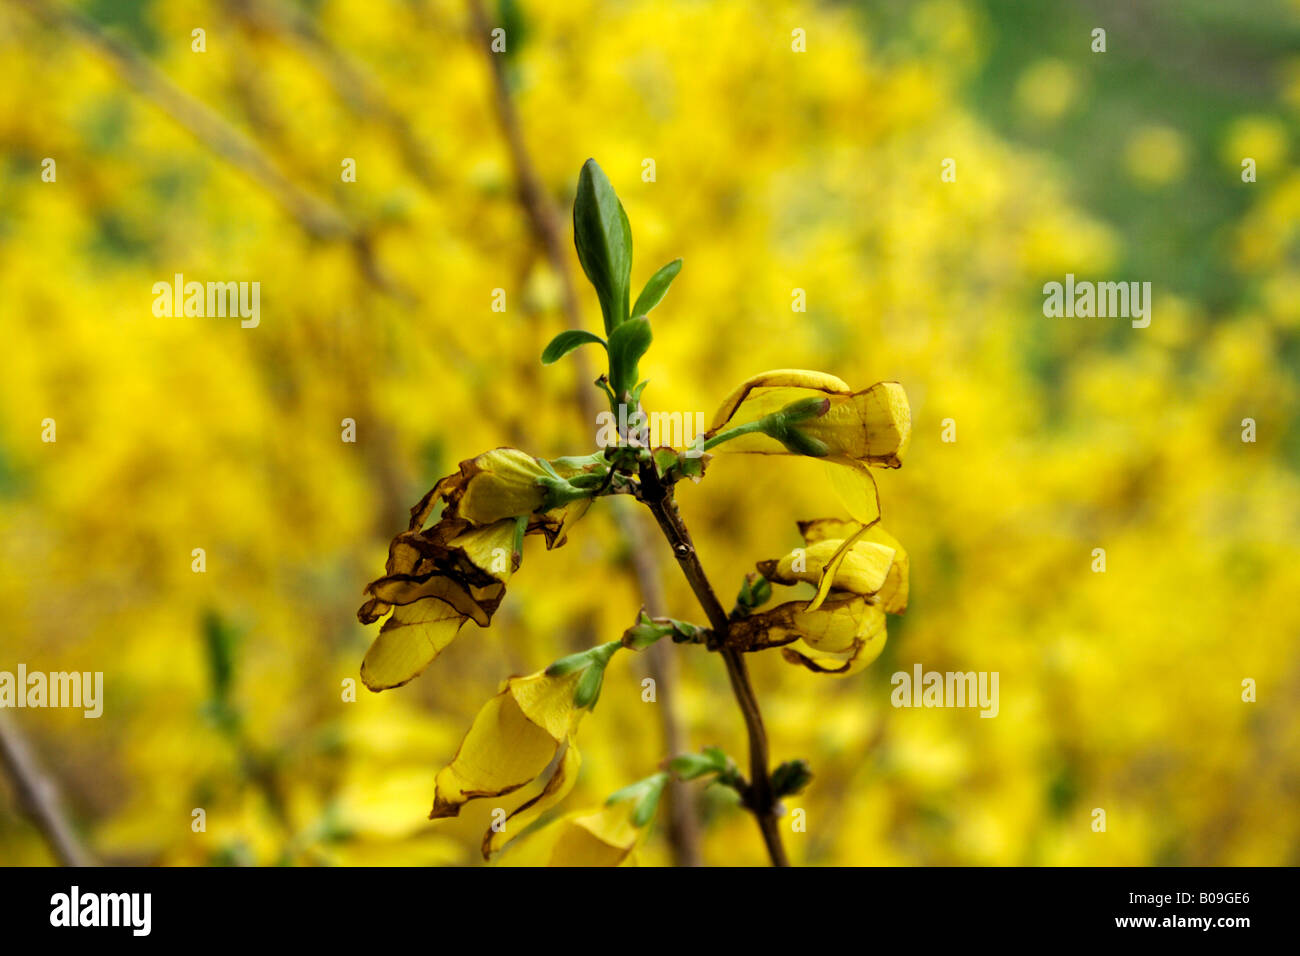 Forsythia flowers with browned, dried edges. Stock Photo